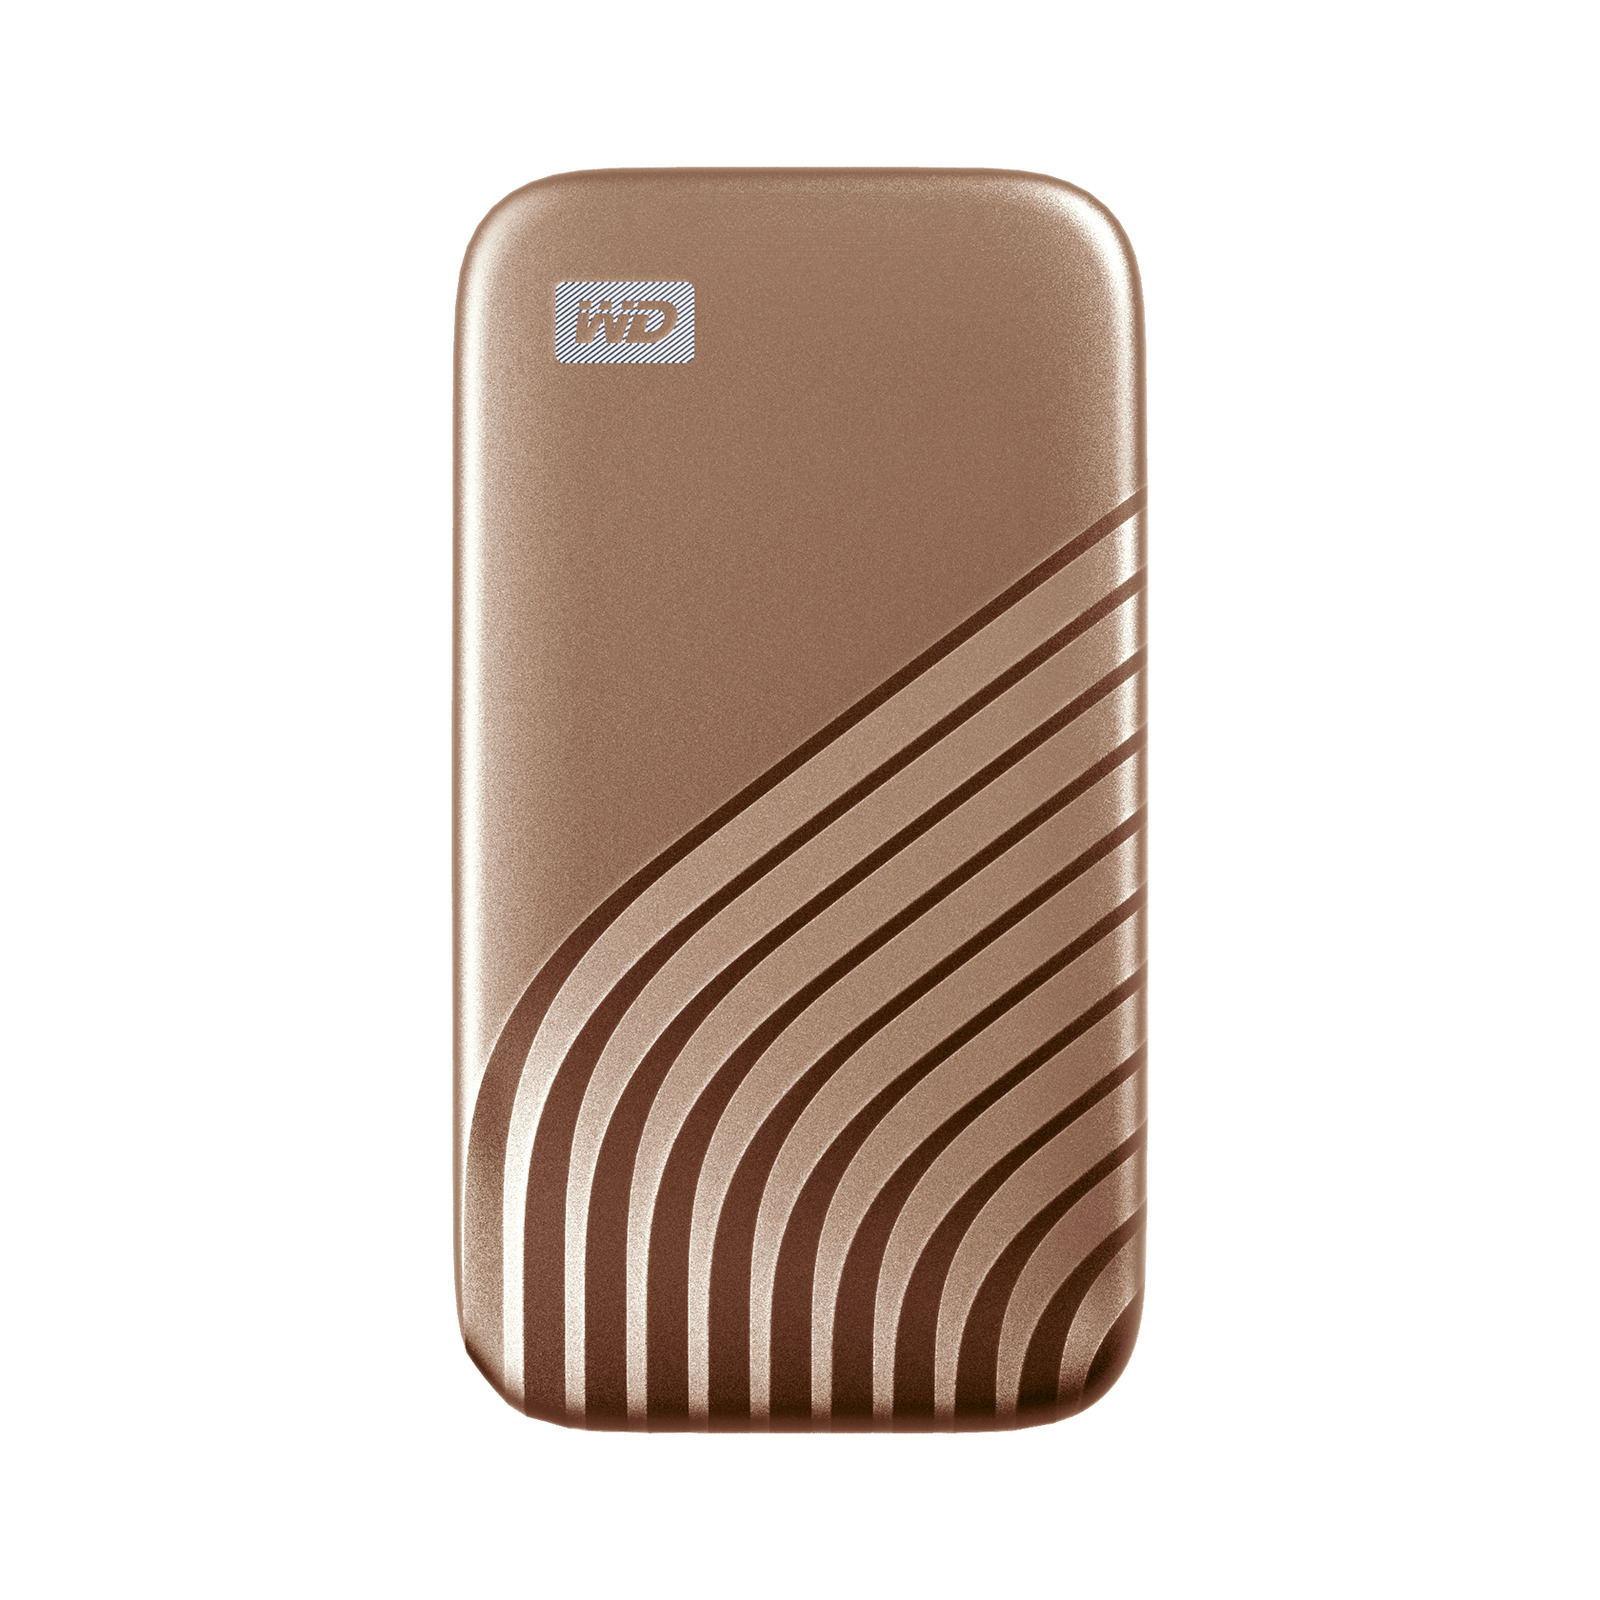 WD 1TB My Passport SSD, Portable External Solid State Drive - WDBAGF0010BGD-WESN